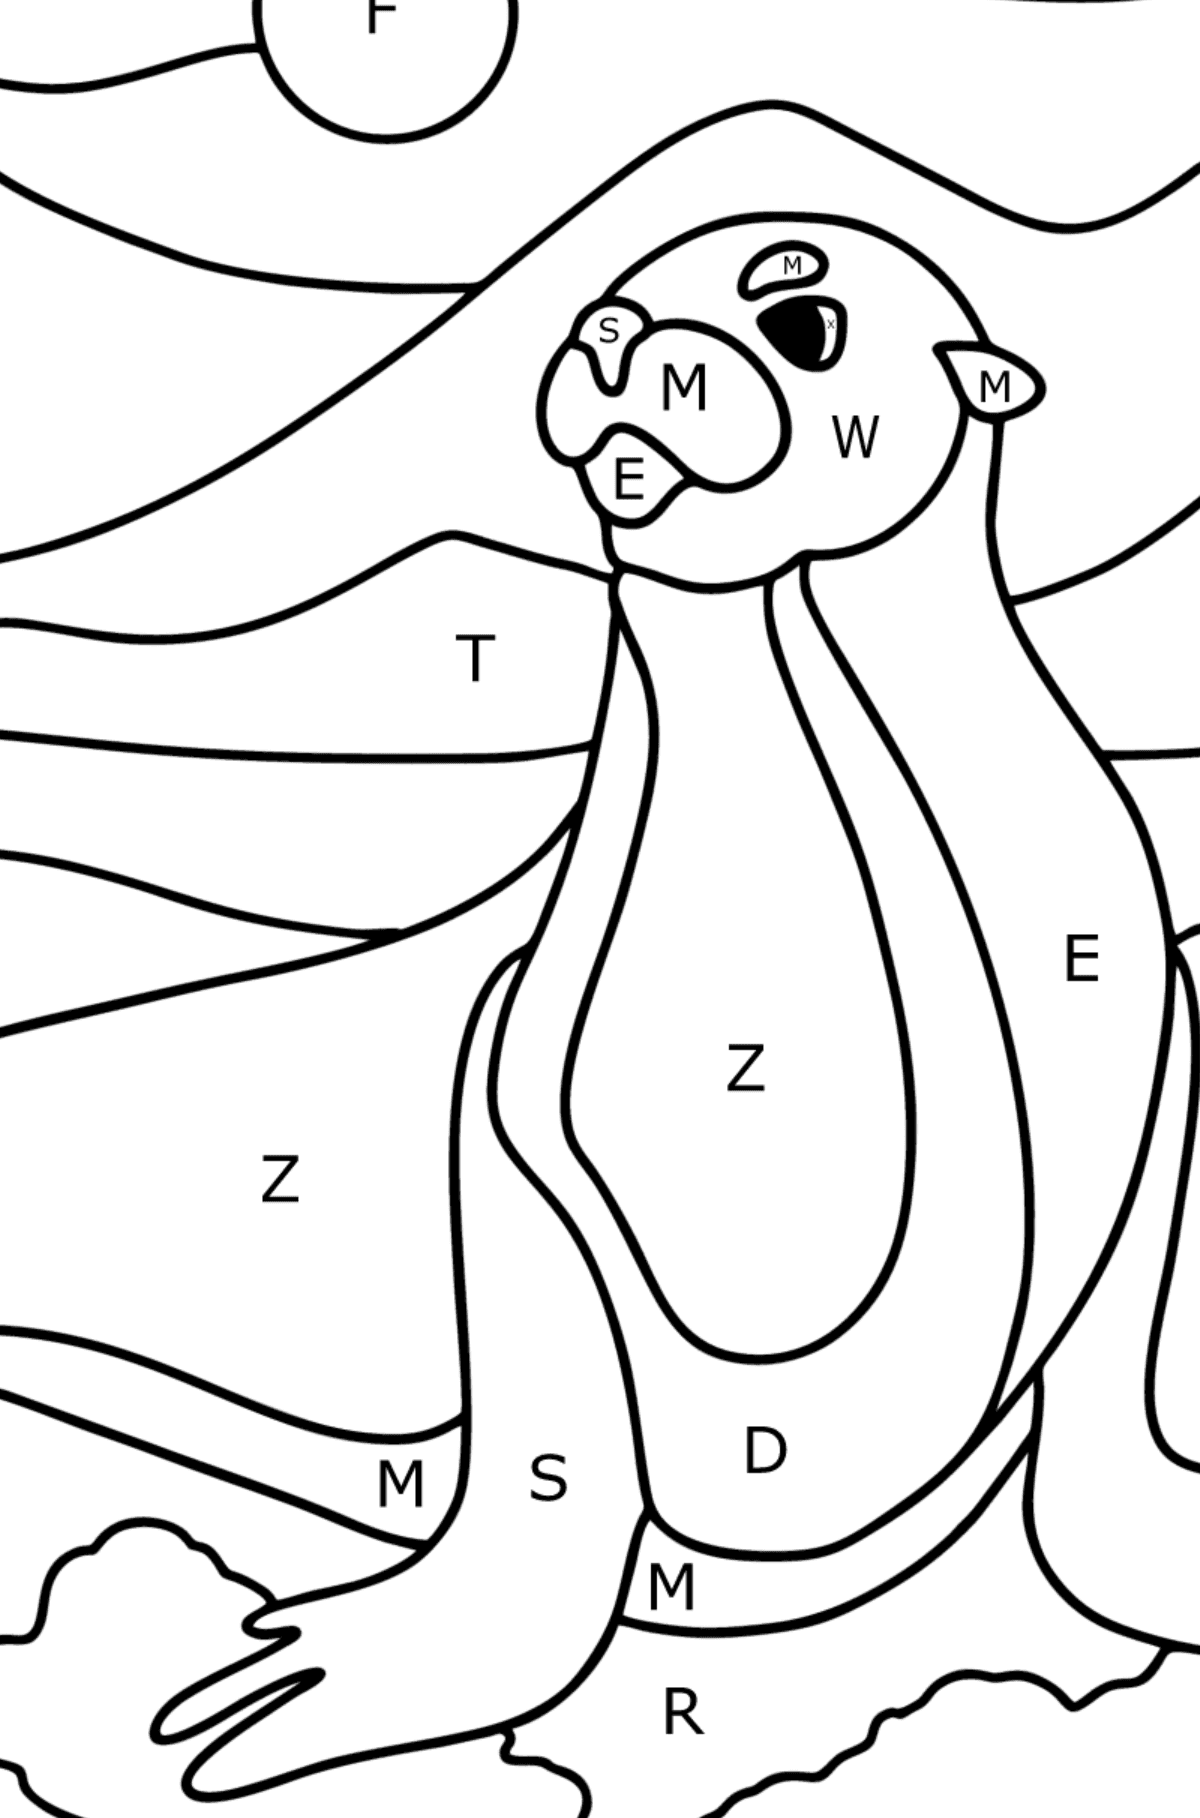 Sea lion coloring page - Coloring by Letters for Kids